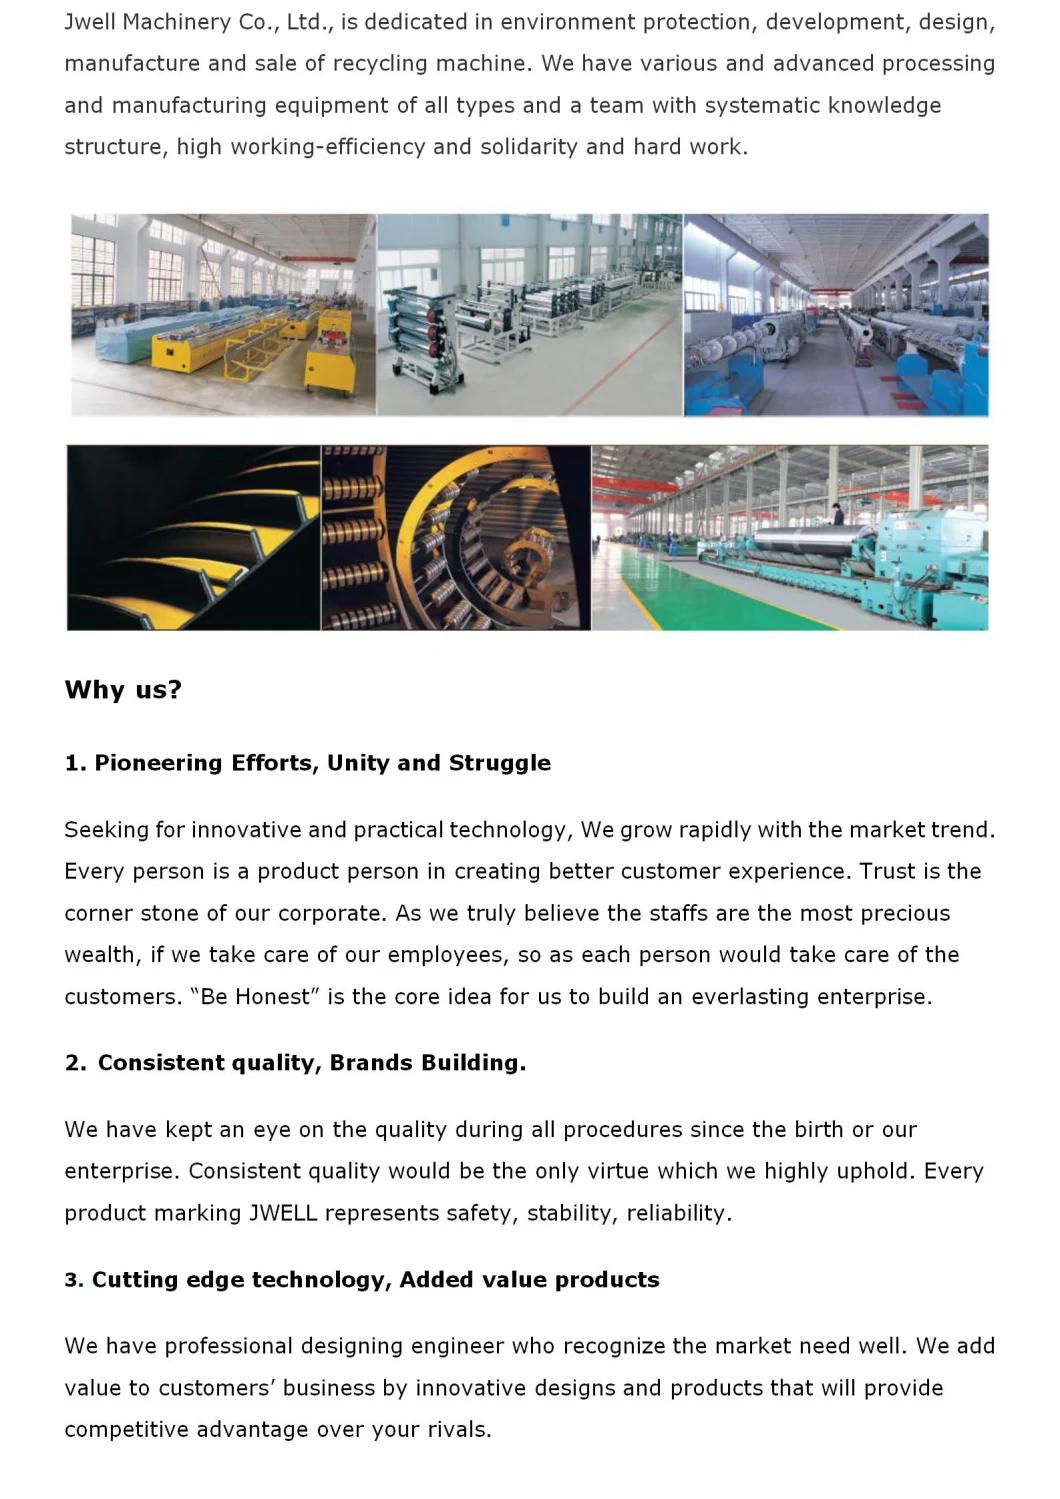 Soft PVC Plastic Pelletizing Hot-Cutting Compounding Extrusion Line for Medical Usage